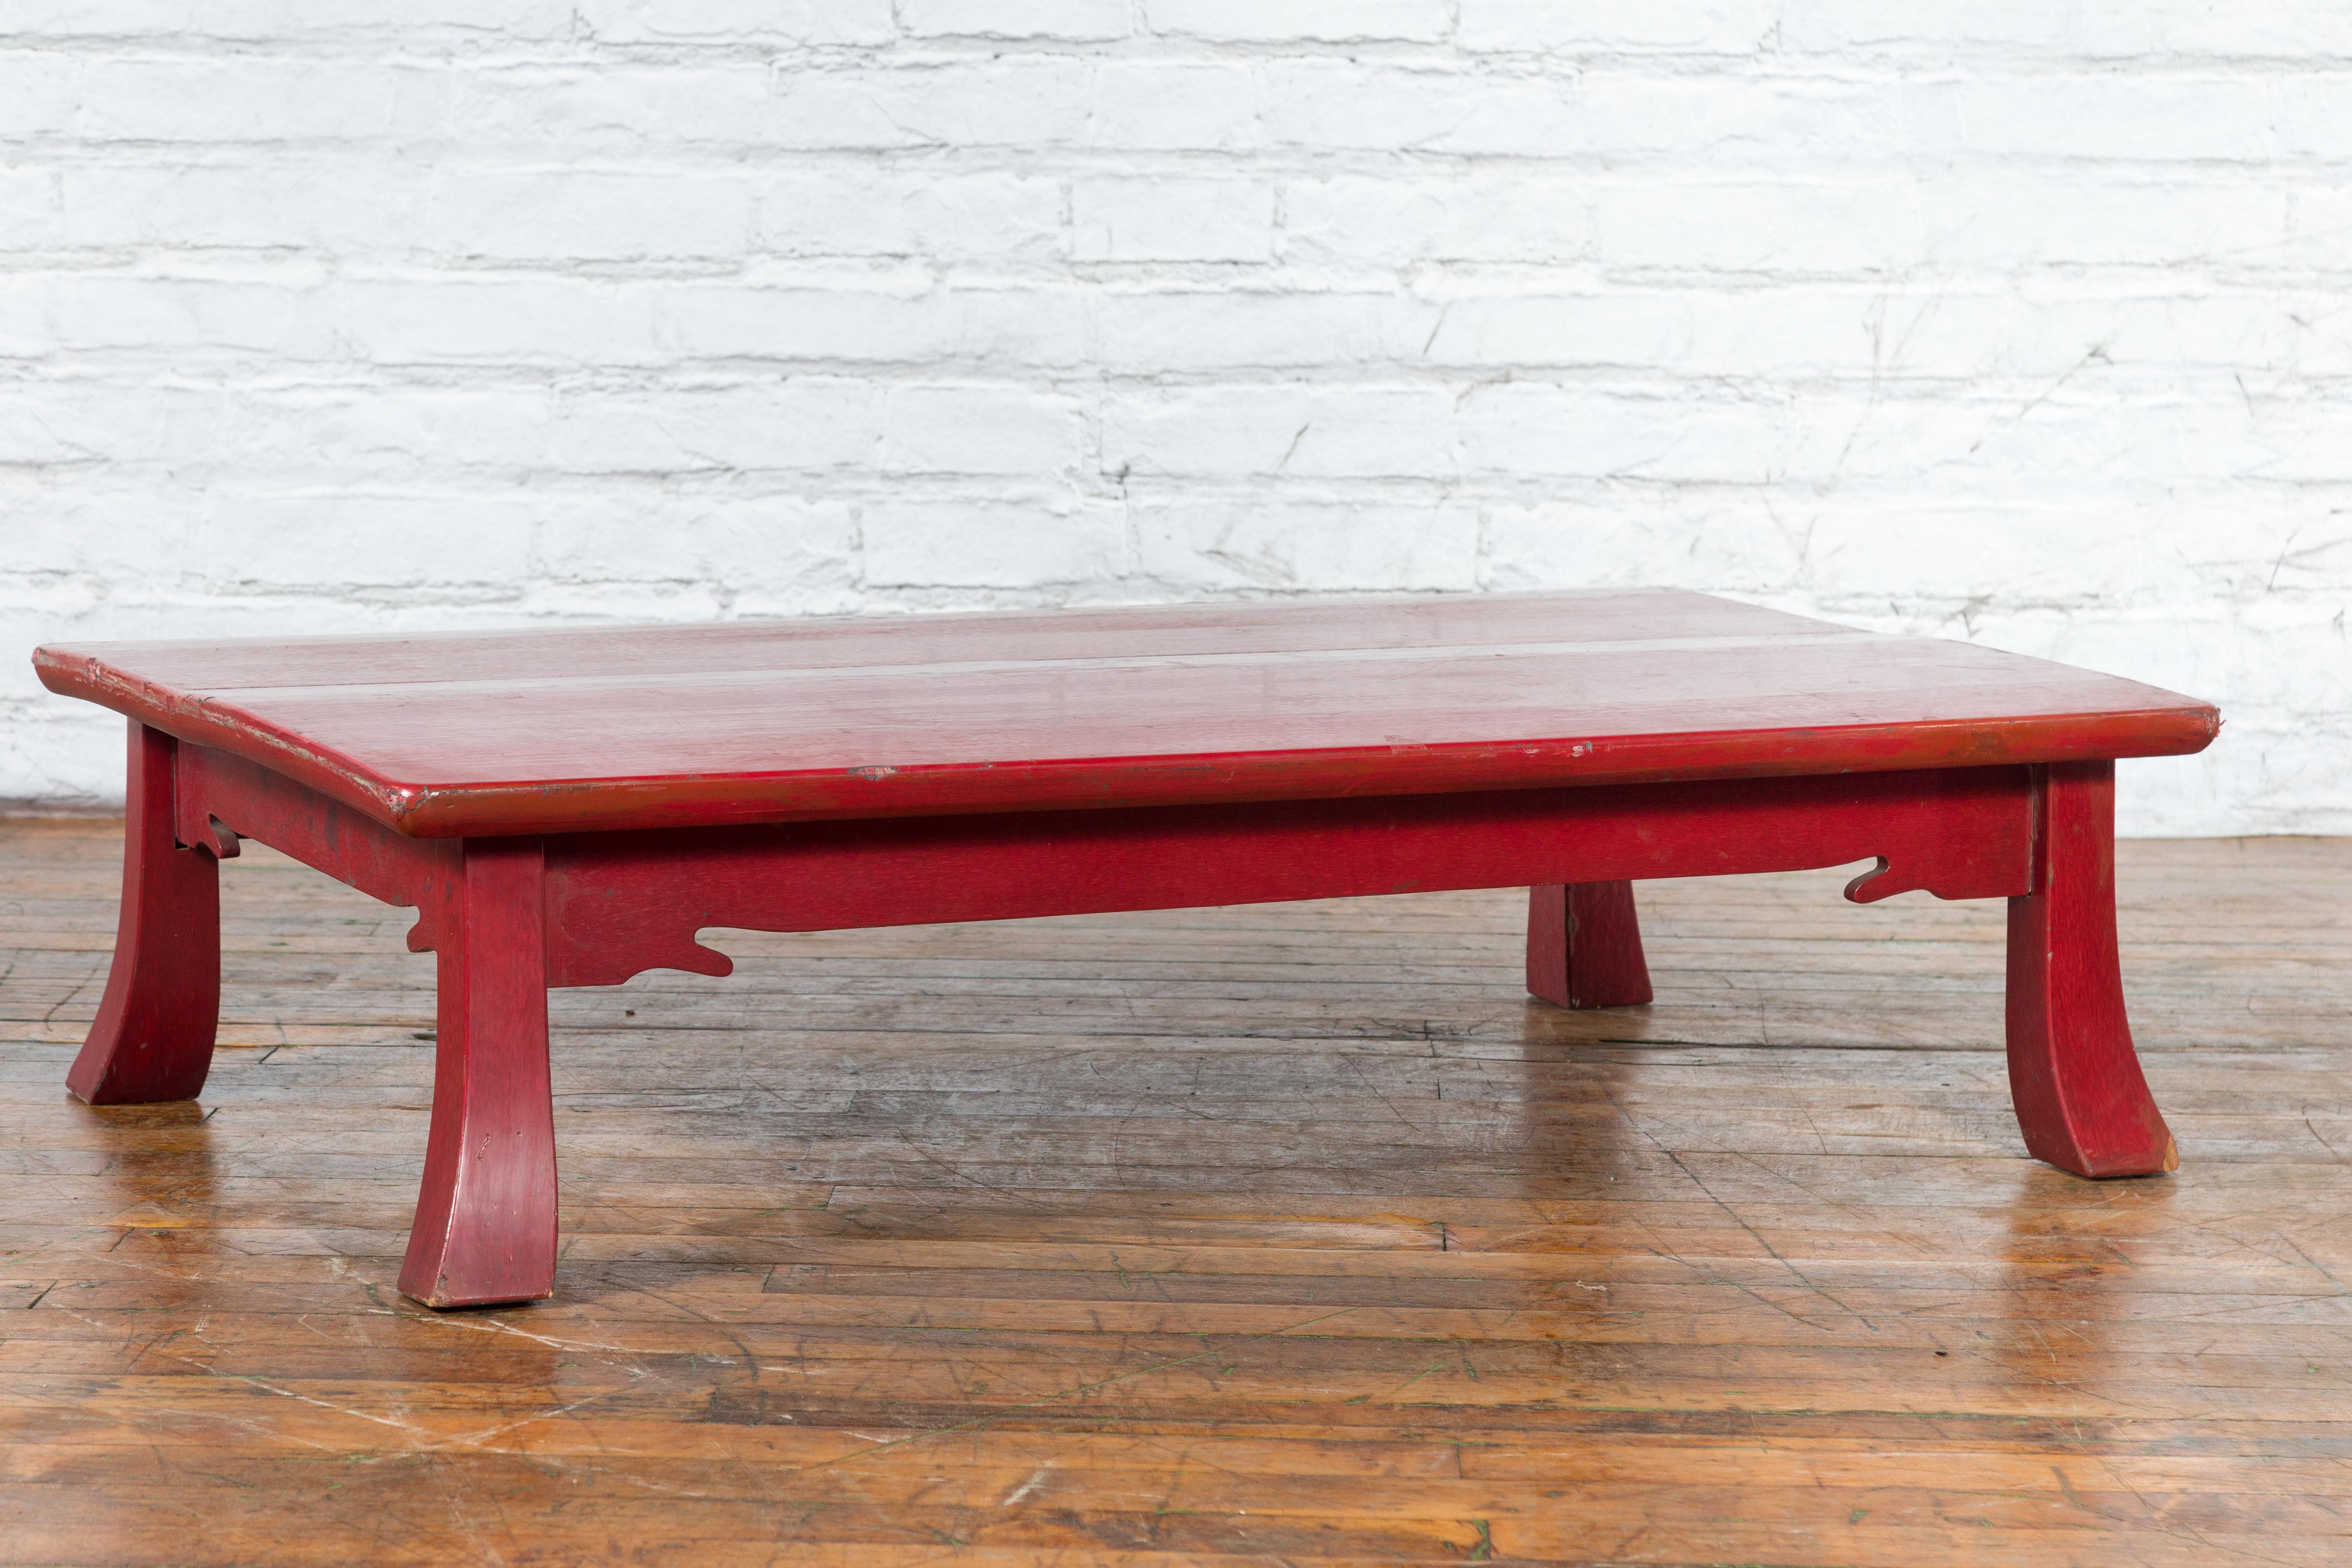 A Japanese Taisho period coffee table from the early 20th century, with red lacquer, textured effects, splaying legs and carved apron. Created in Japan during the Taisho period which ran from 1912 to 1926, this small coffee table features a